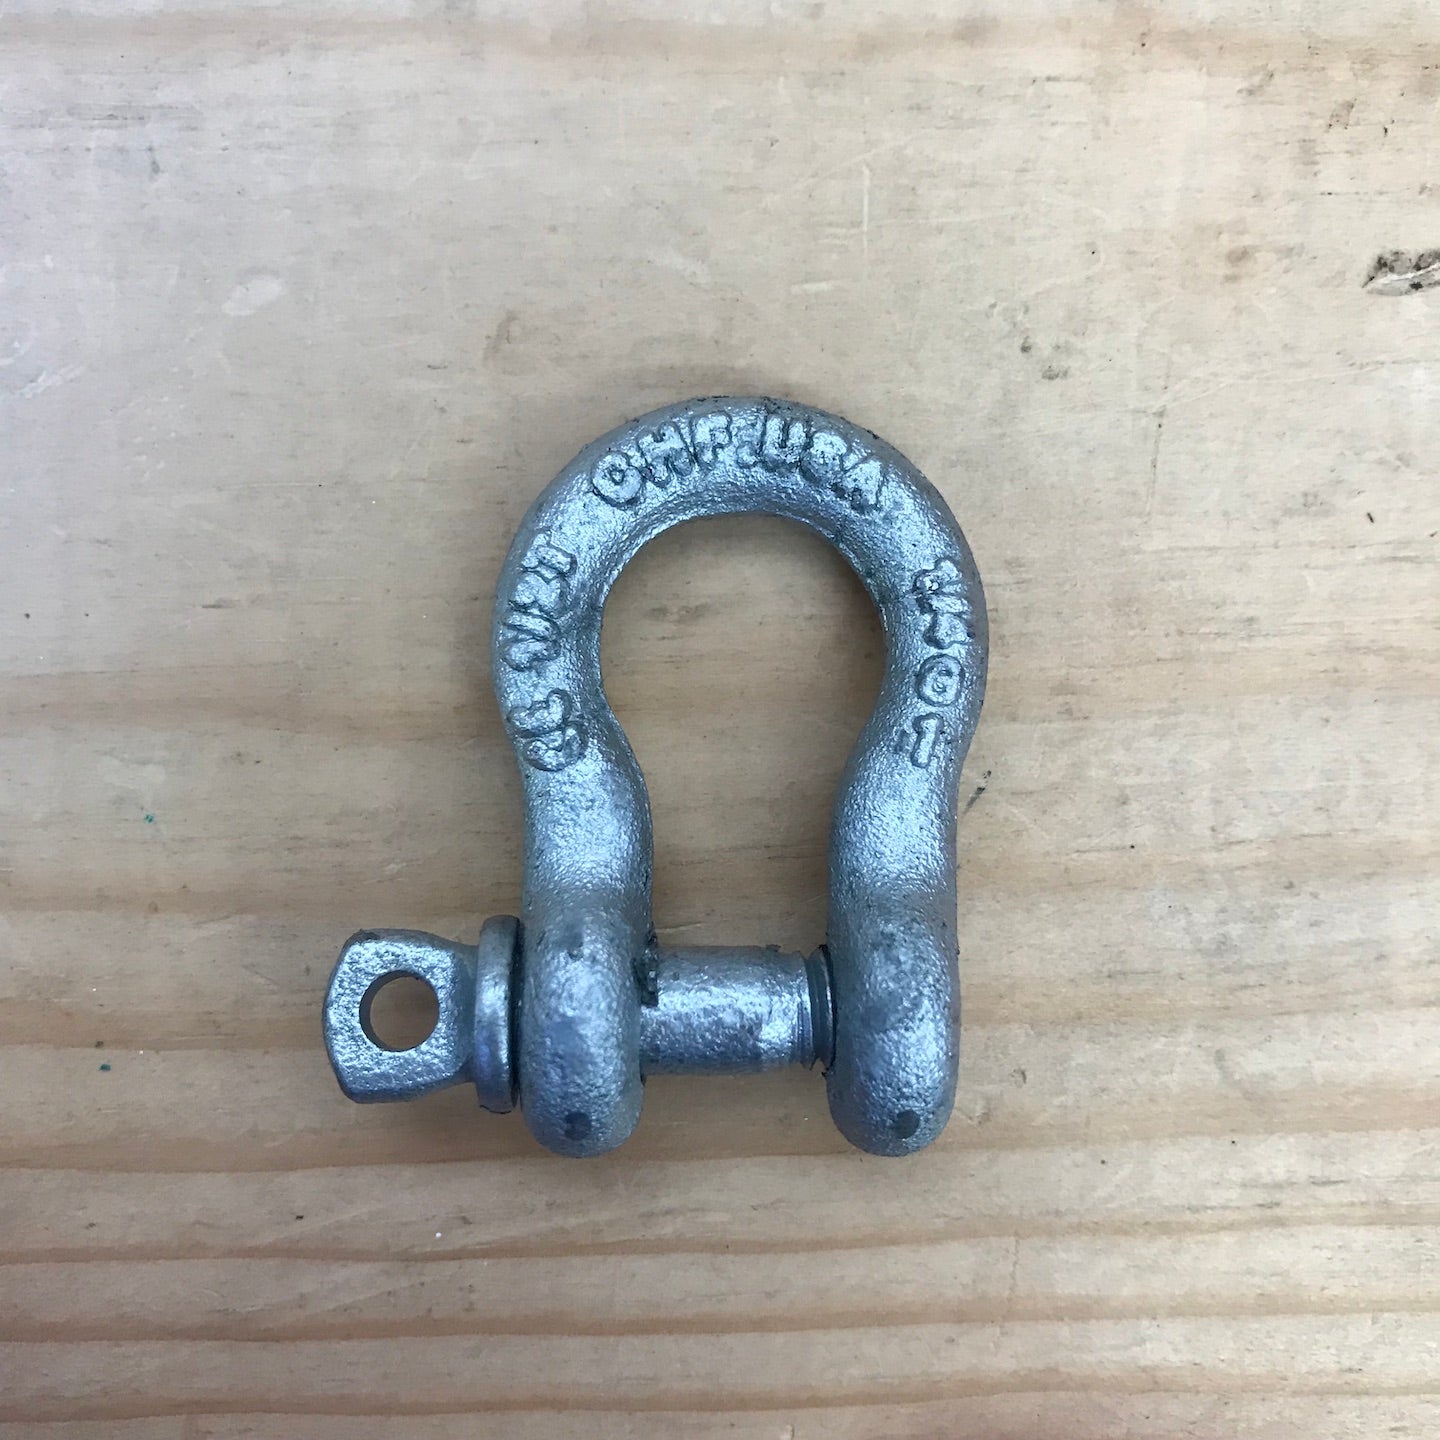 Chicago Hardware 1/4" Galvanized Anchor Screw Pin Shackle (20110-0)